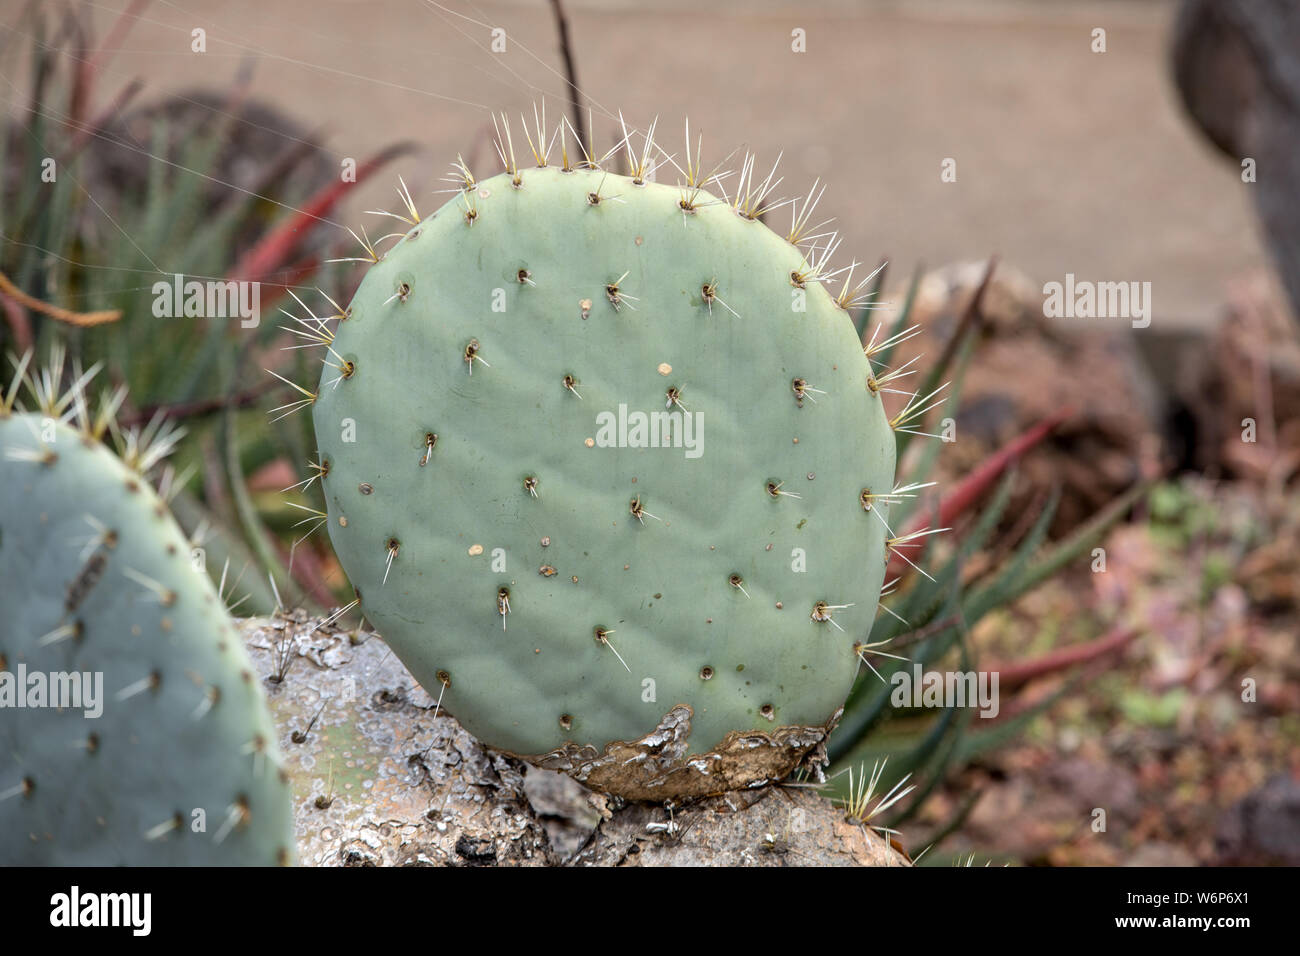 Opuntia vulgaris is a species of cactus that has long been a domesticated crop plant important in agricultural economies throughout arid and semiarid Stock Photo